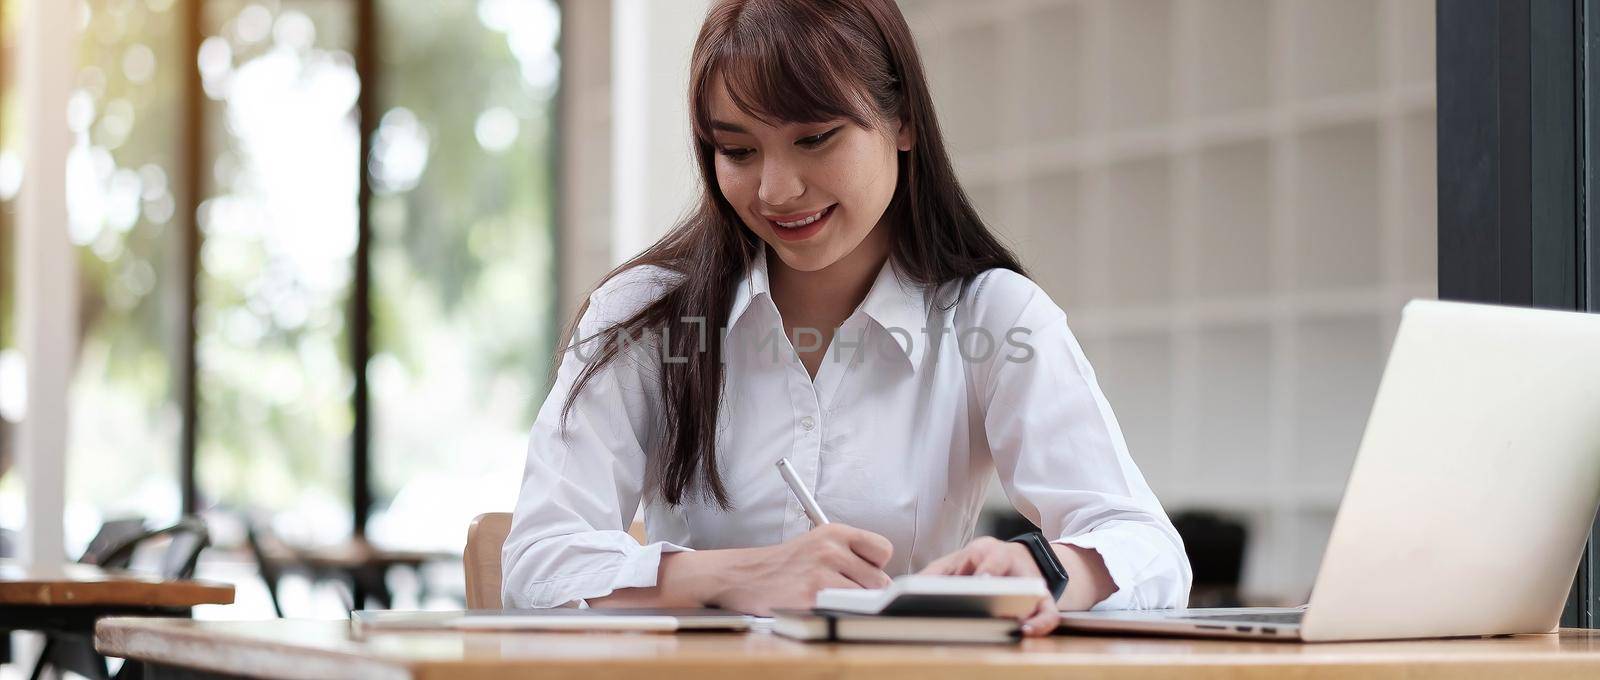 A young, cheerful girl in a white shirt smiles, smiling toothily writing down notes holding training for students to be executives at laptop desktop table by wichayada